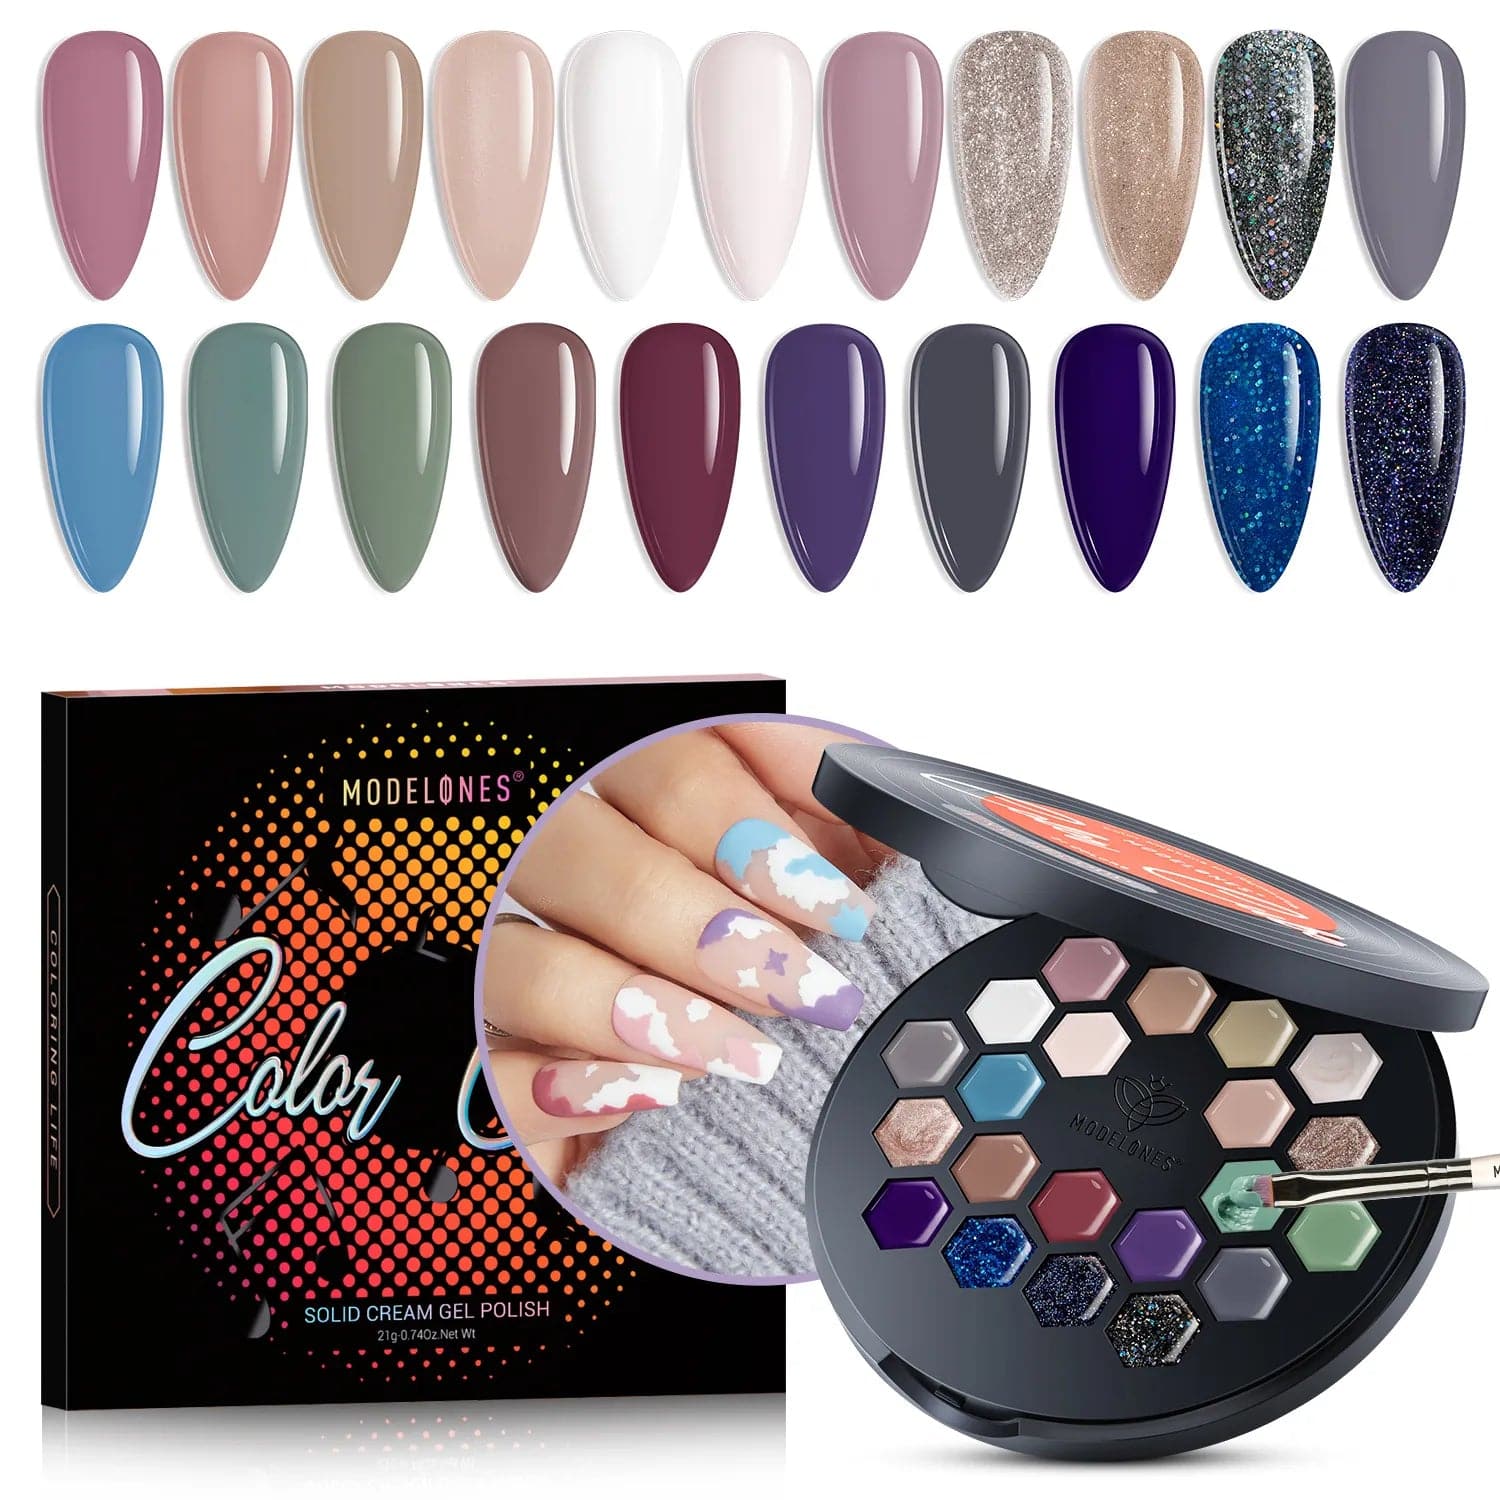 Find Your Muse - 21 Colors Vinyl Record Solid Cream Gel Polish Color Cube